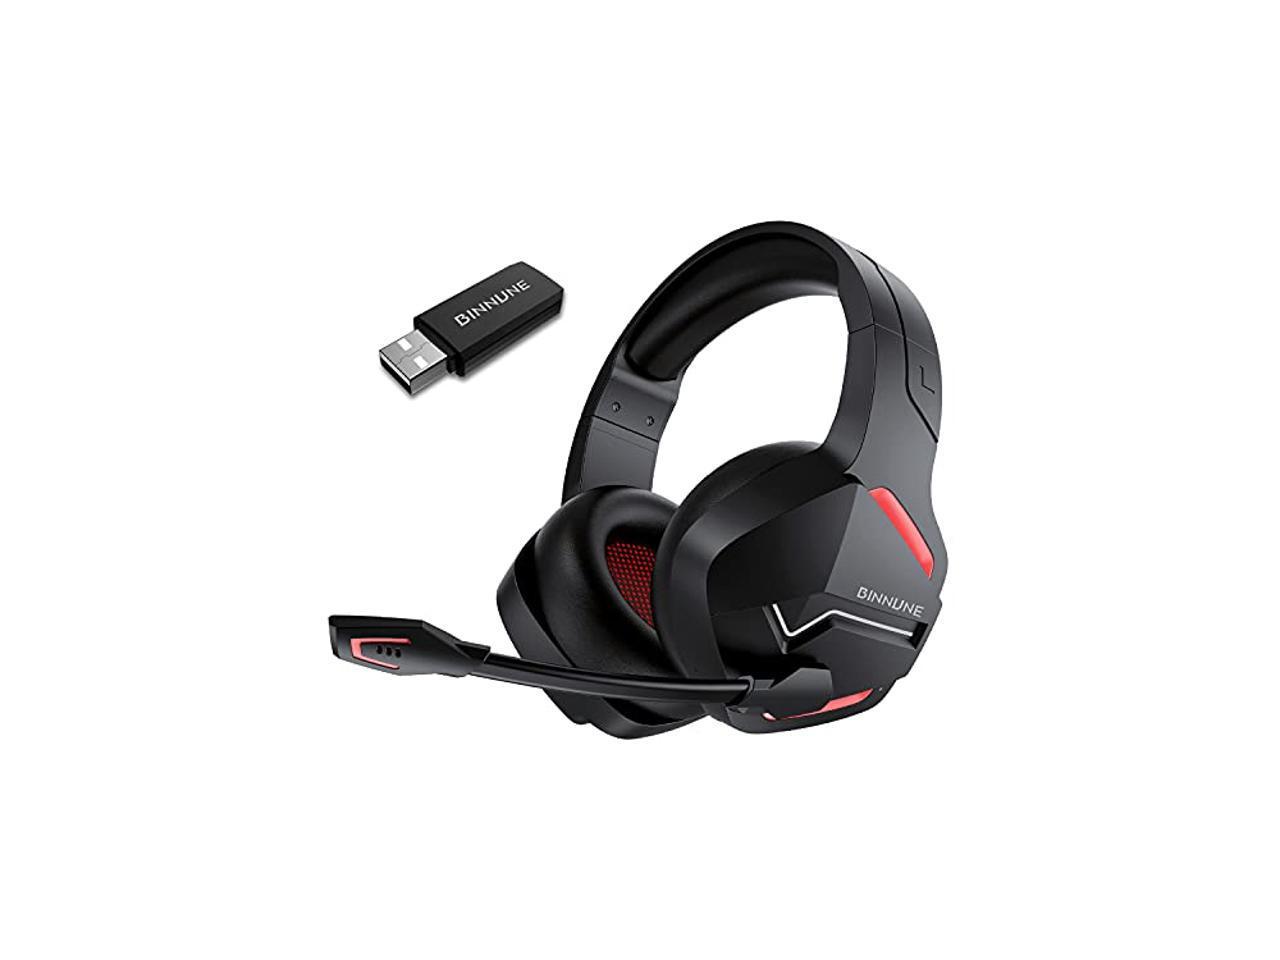 BINNUNE Wireless Gaming Headset with Microphone for PC PS4 PS5 